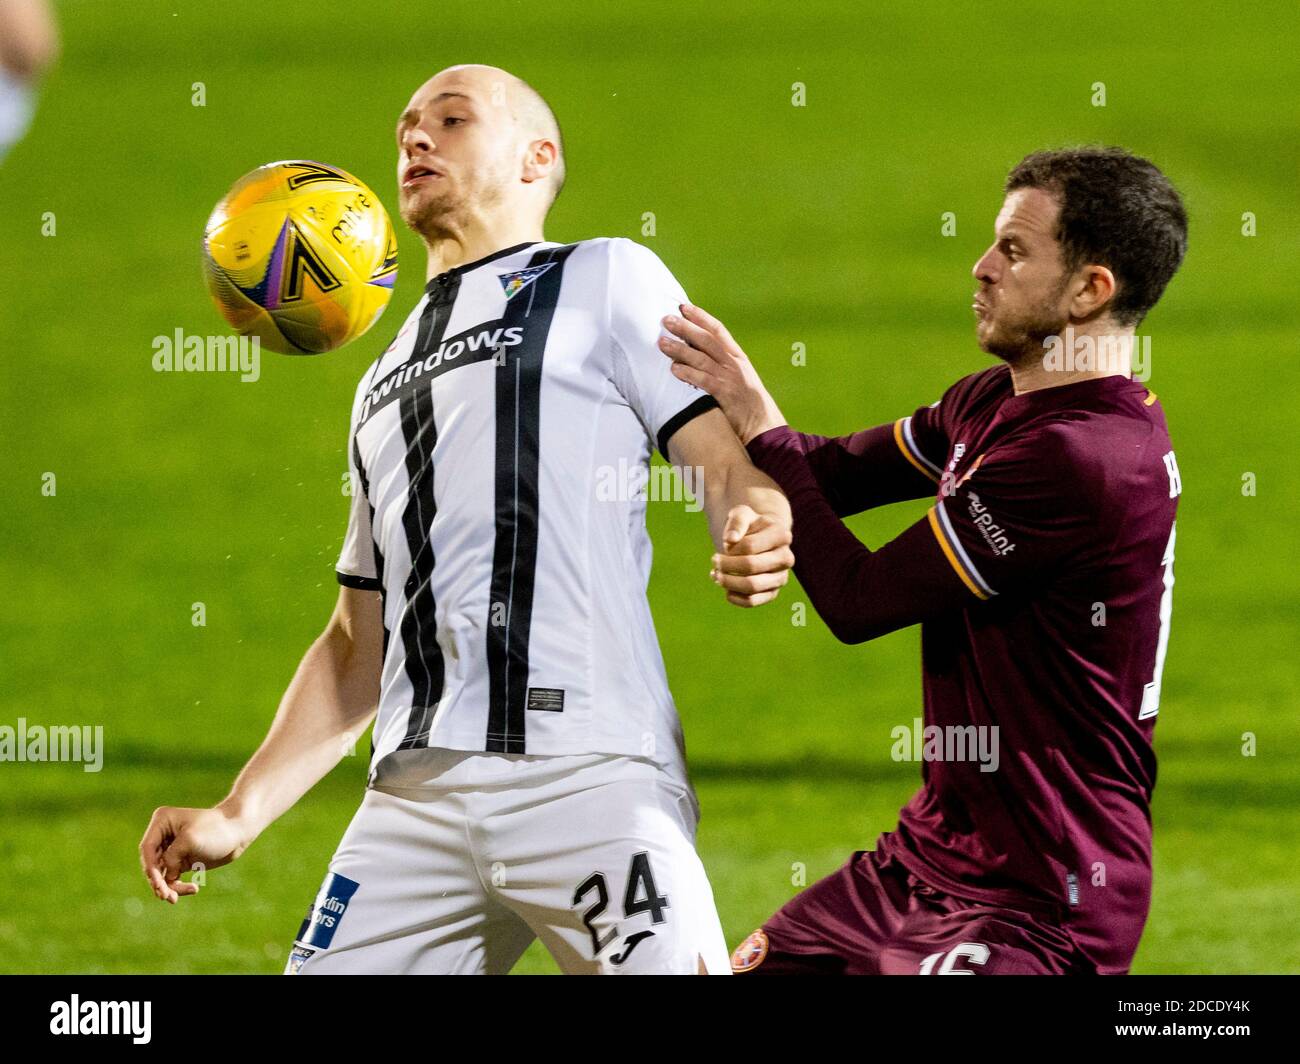 Dunfermline, Scotland, UK. 20th November 2020  Kerr McInroy of Dunfermline and Andrew Halliday of Hearts compete for possession of the ball during the Scottish Championship game against Dunfermline V Hearts at East End Park Stadium.  Credit: Alan Rennie/Alamy Live News Stock Photo